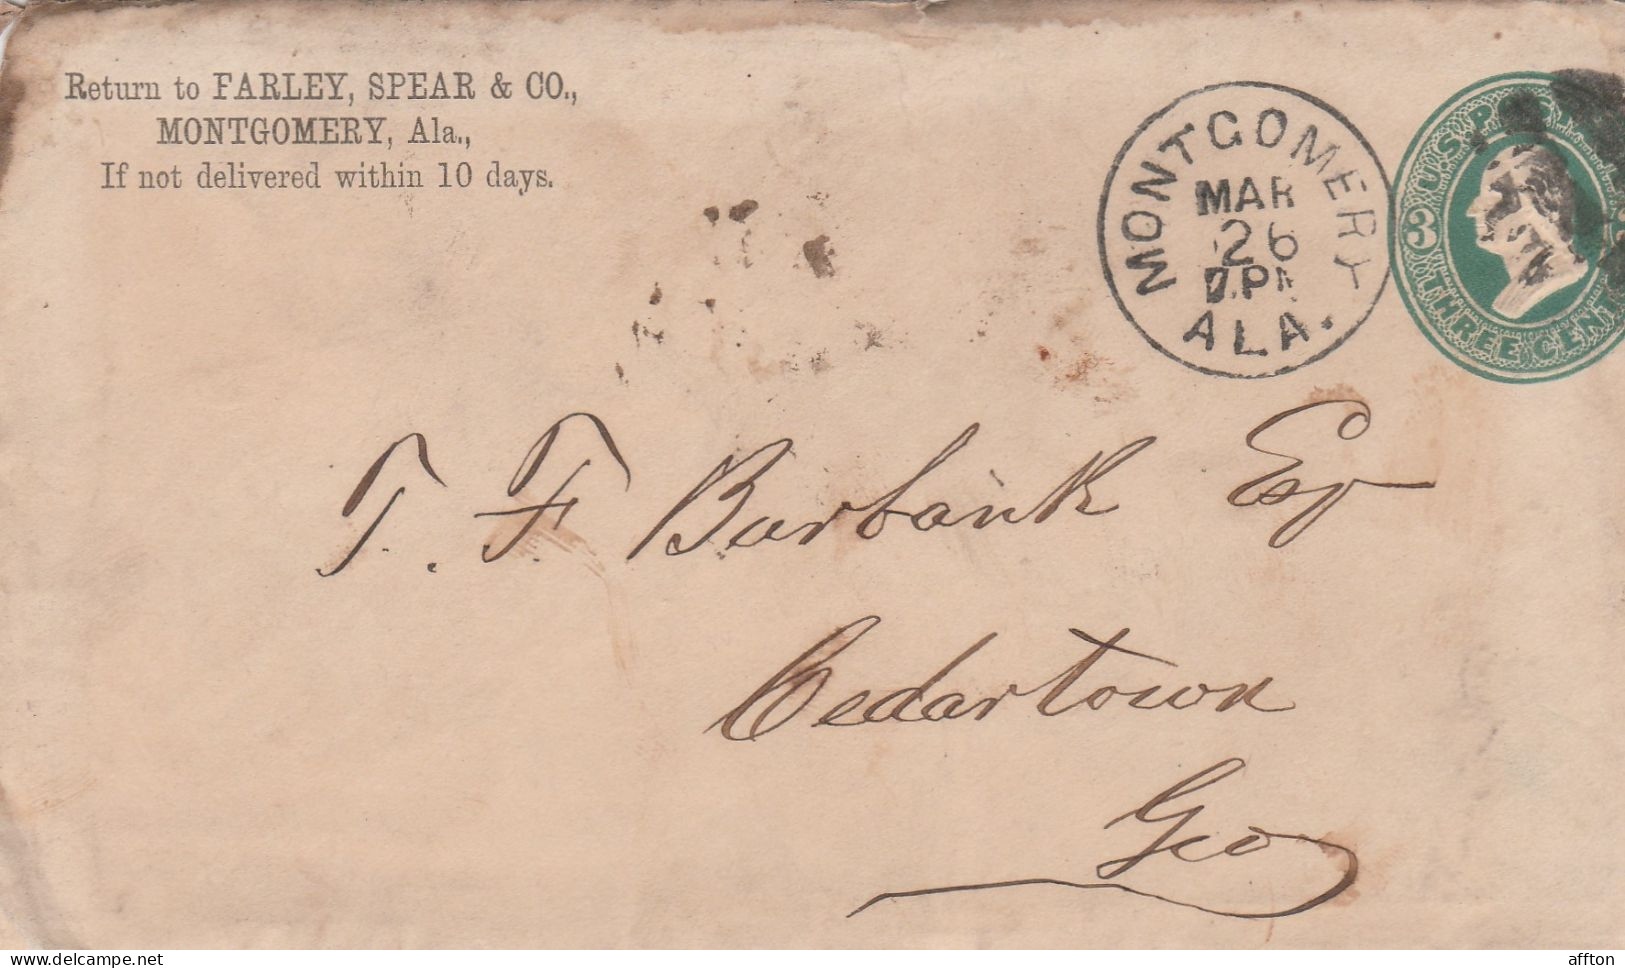 United States Old Cover Mailed - ...-1900